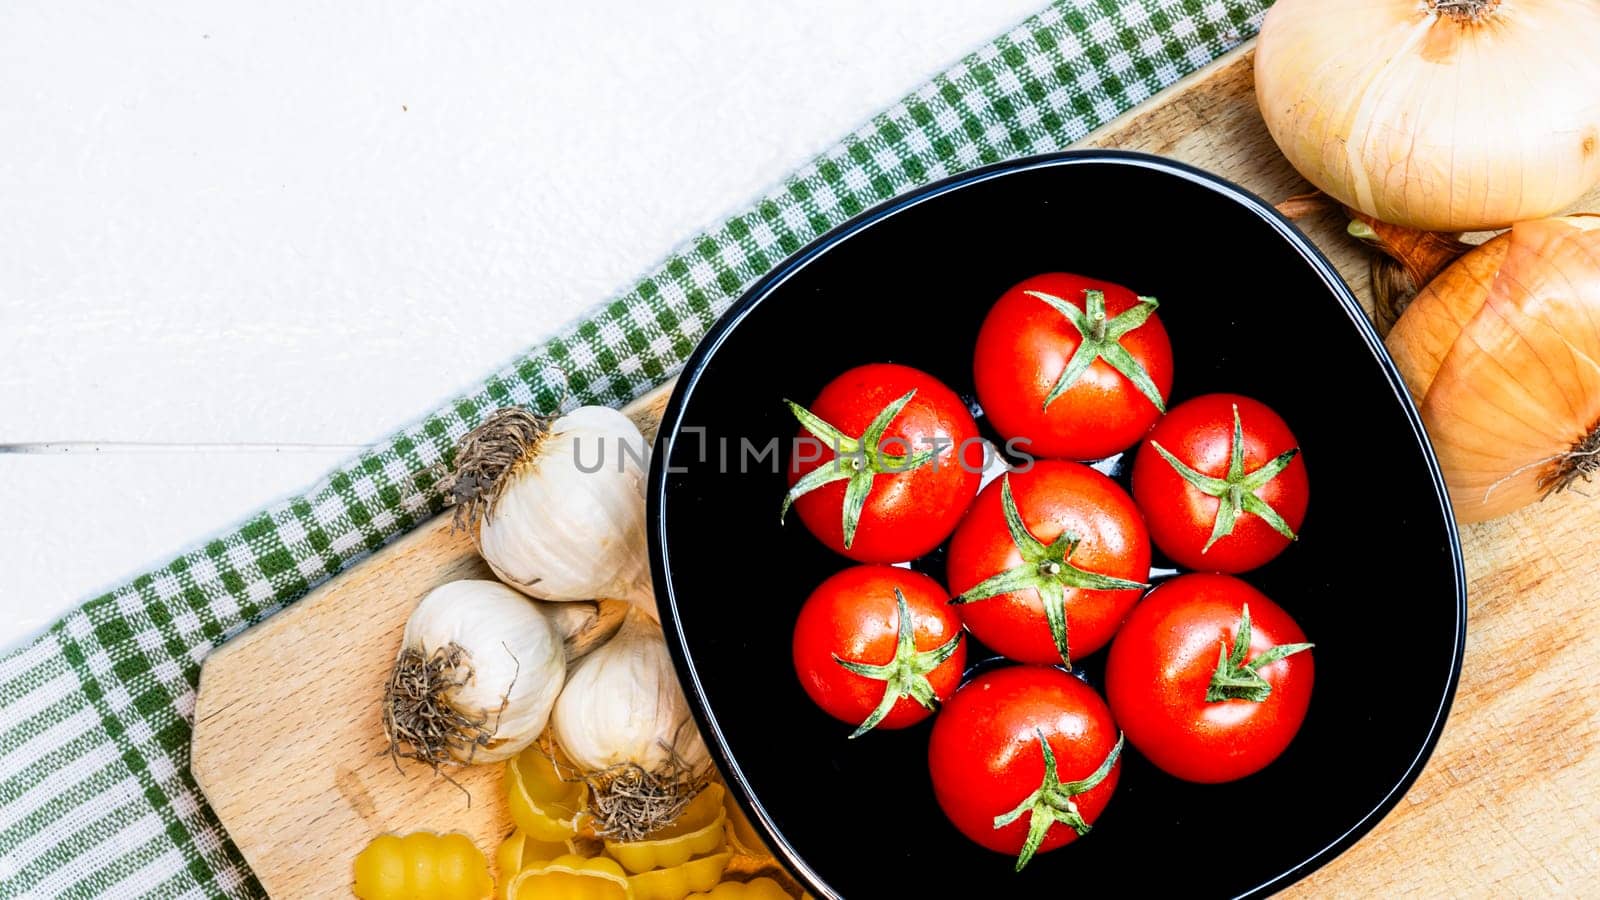 Top view of onions, garlic and fresh ripe cherry tomatoes on a rustic white wooden table. Ingredients and food concept